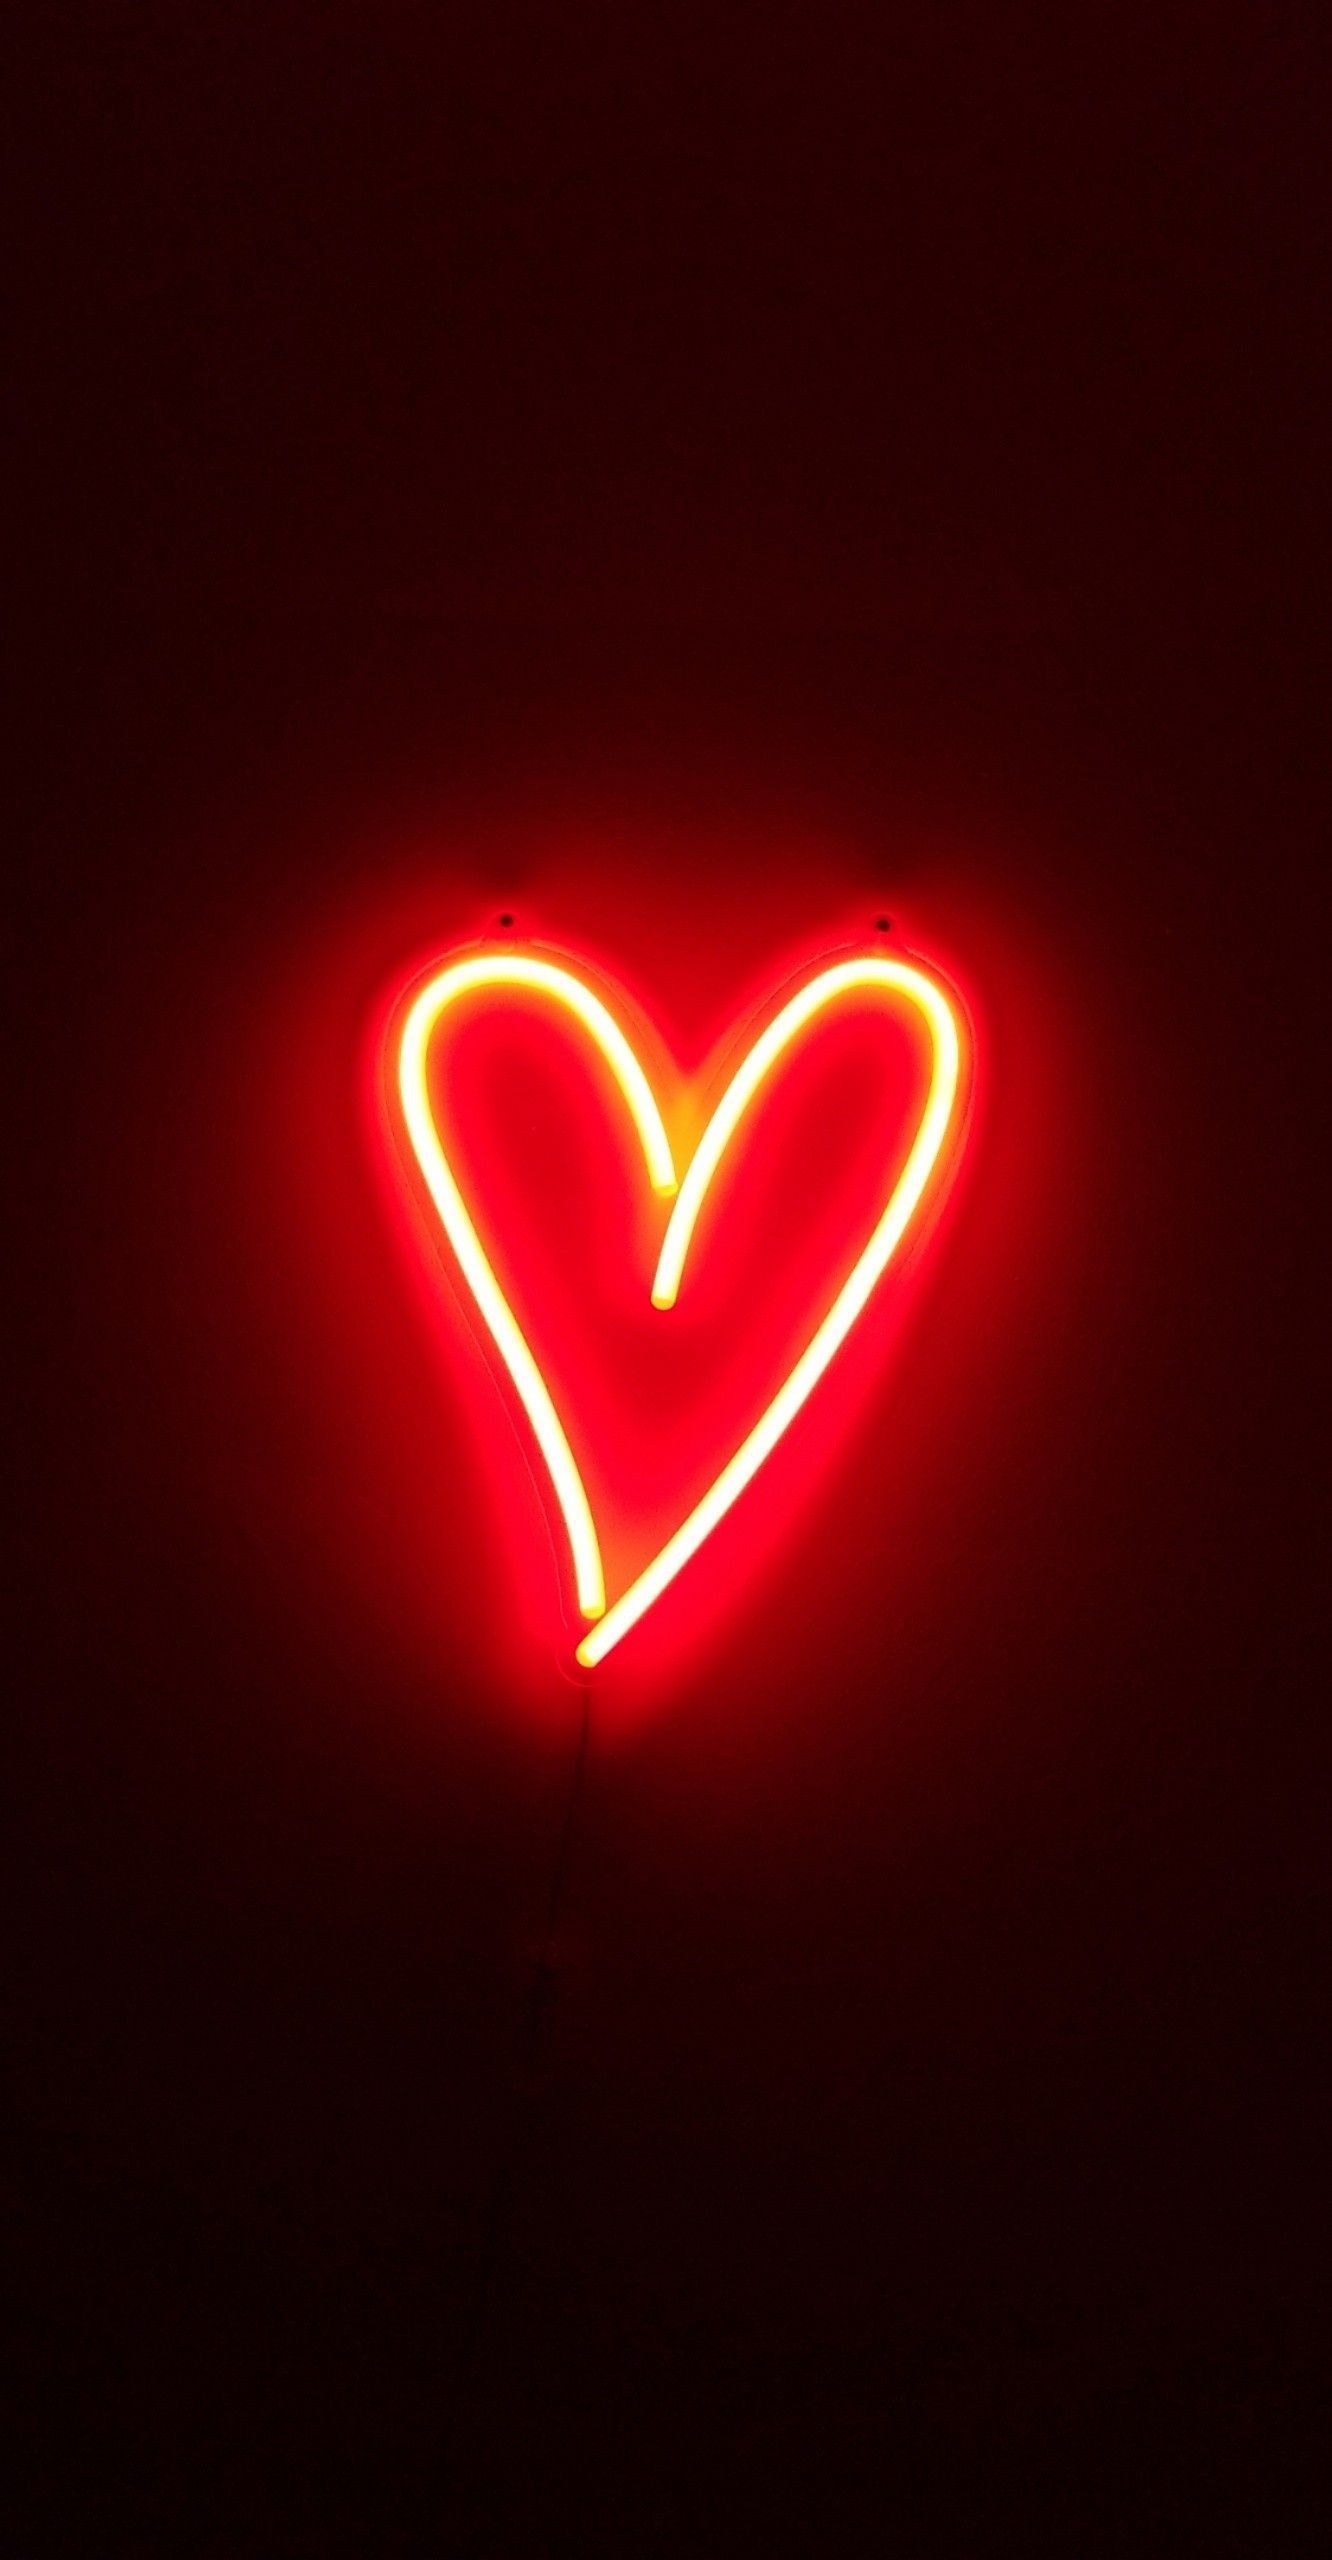 A red neon sign in the shape of a heart. - Light red, neon red